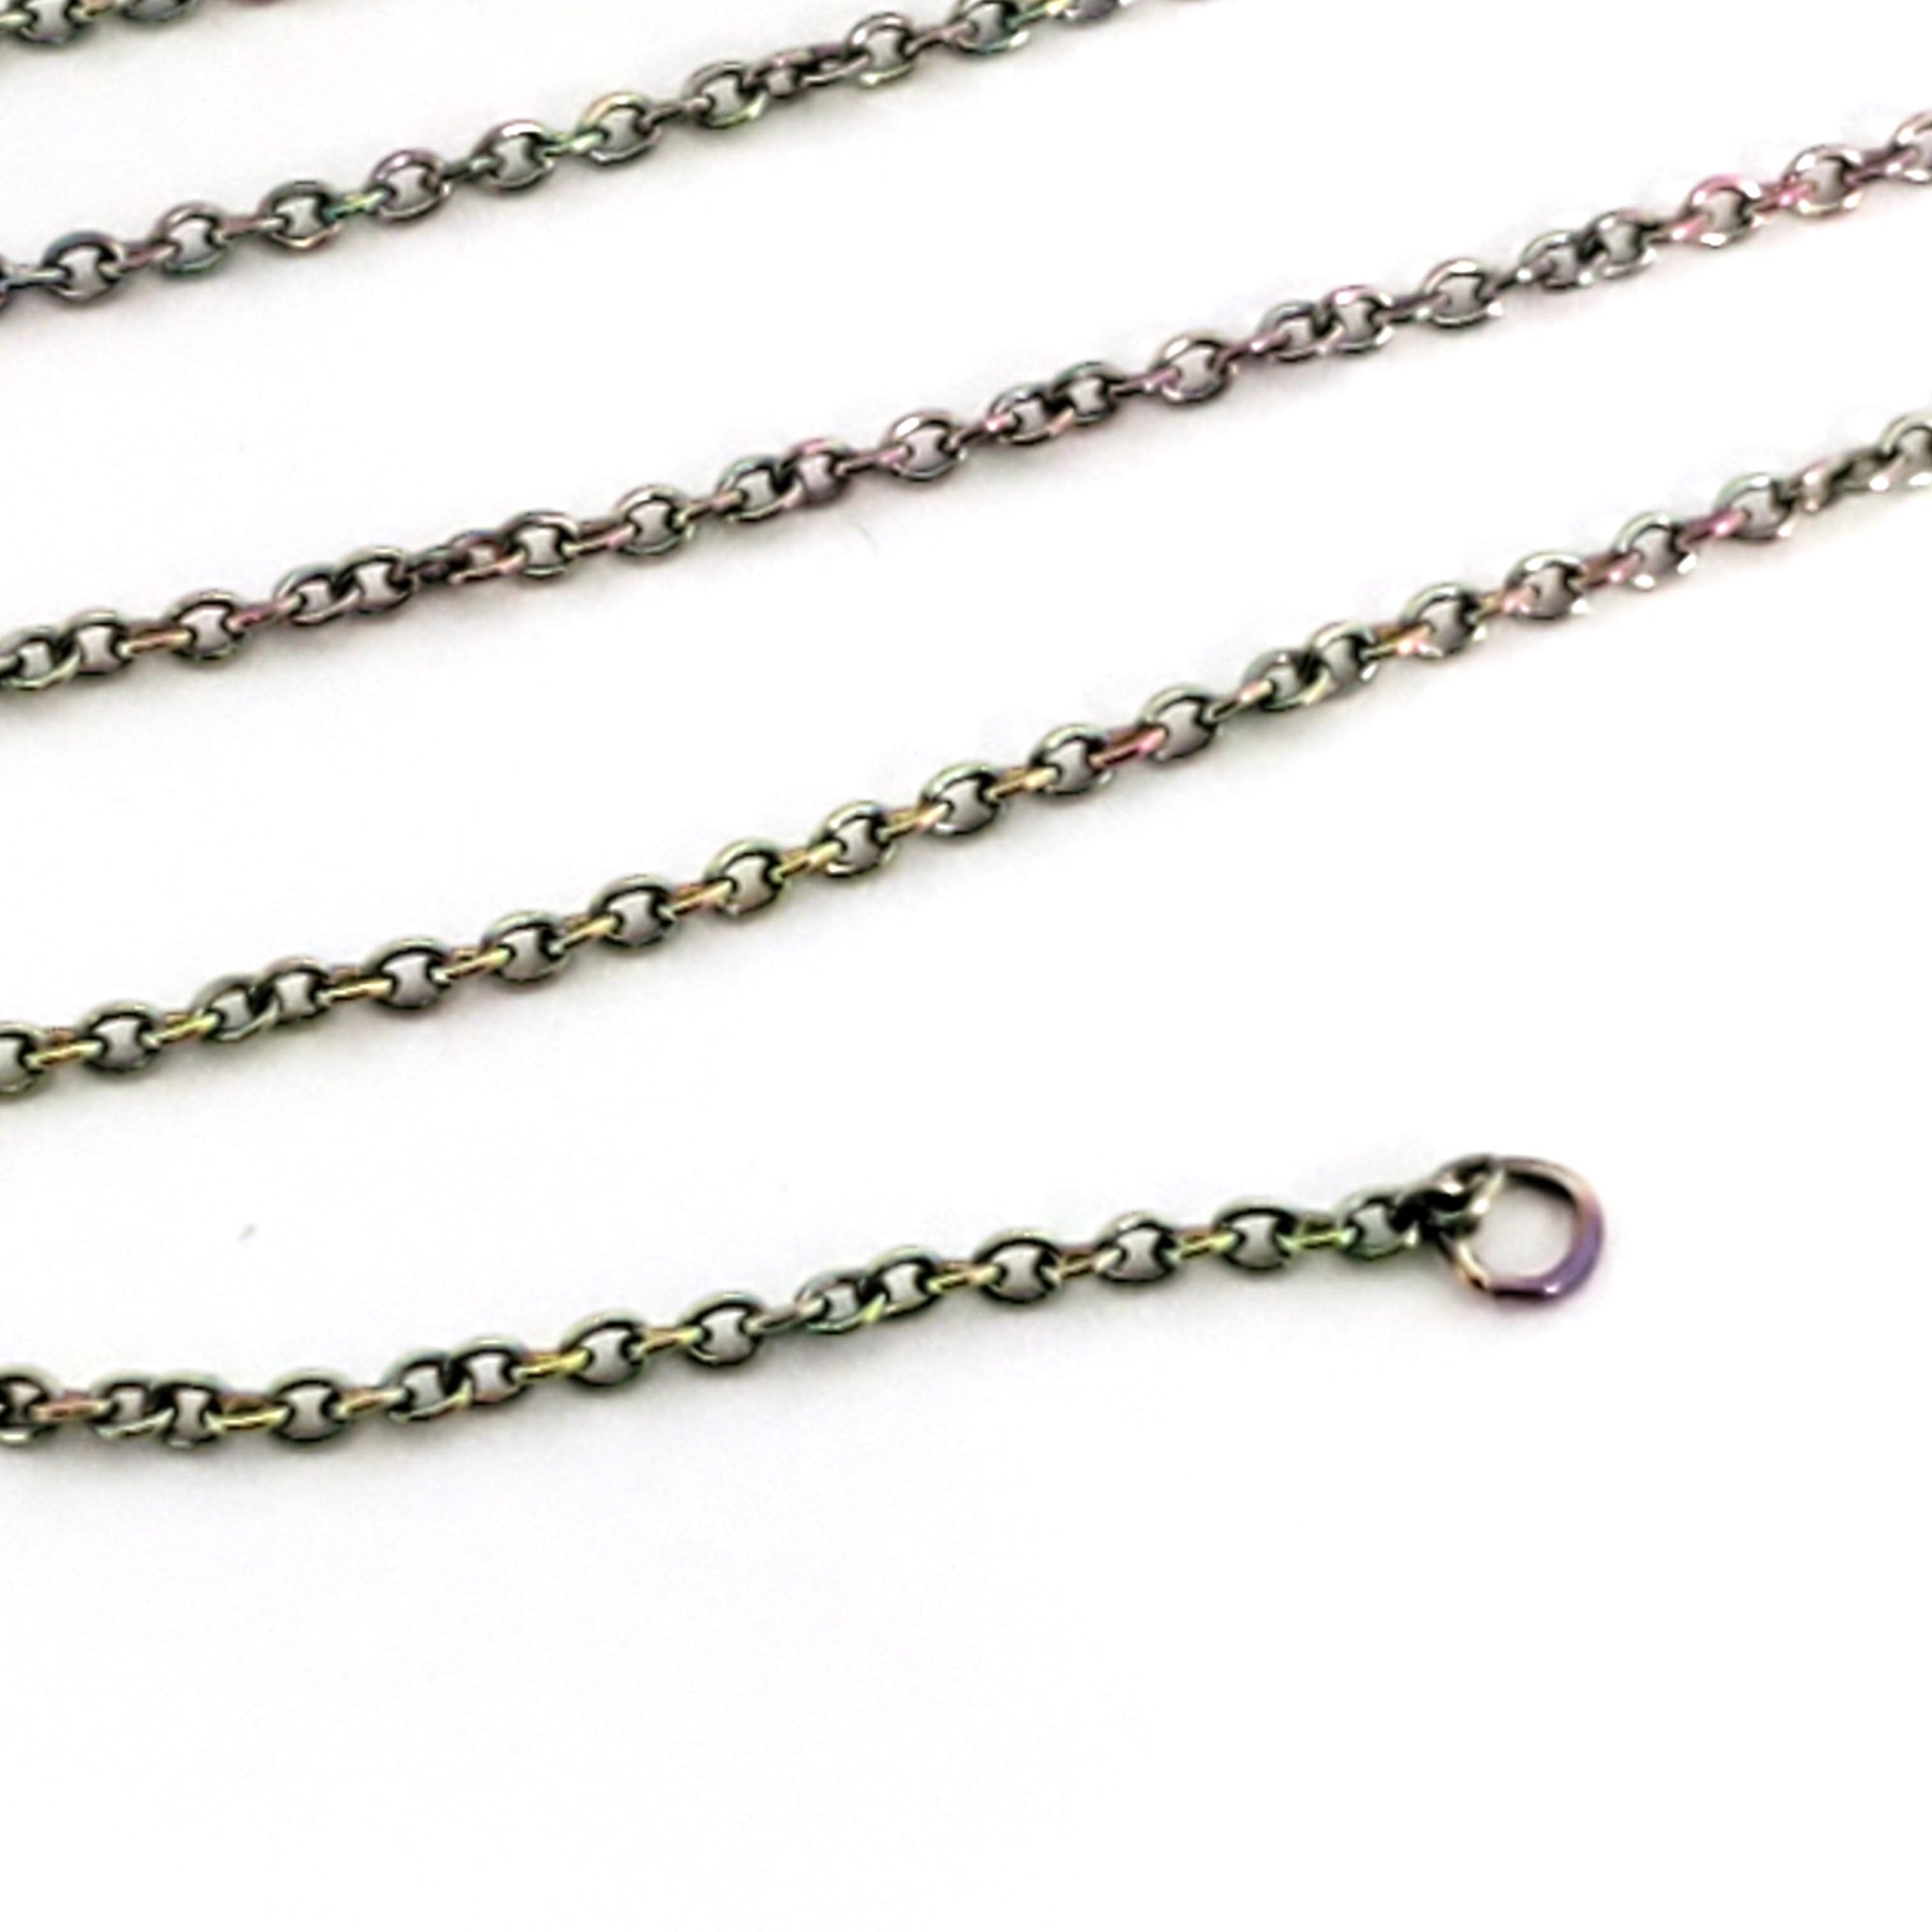 2 FT Rainbow Chain BULK Chain for Jewelry Making Cross Stainless Steel